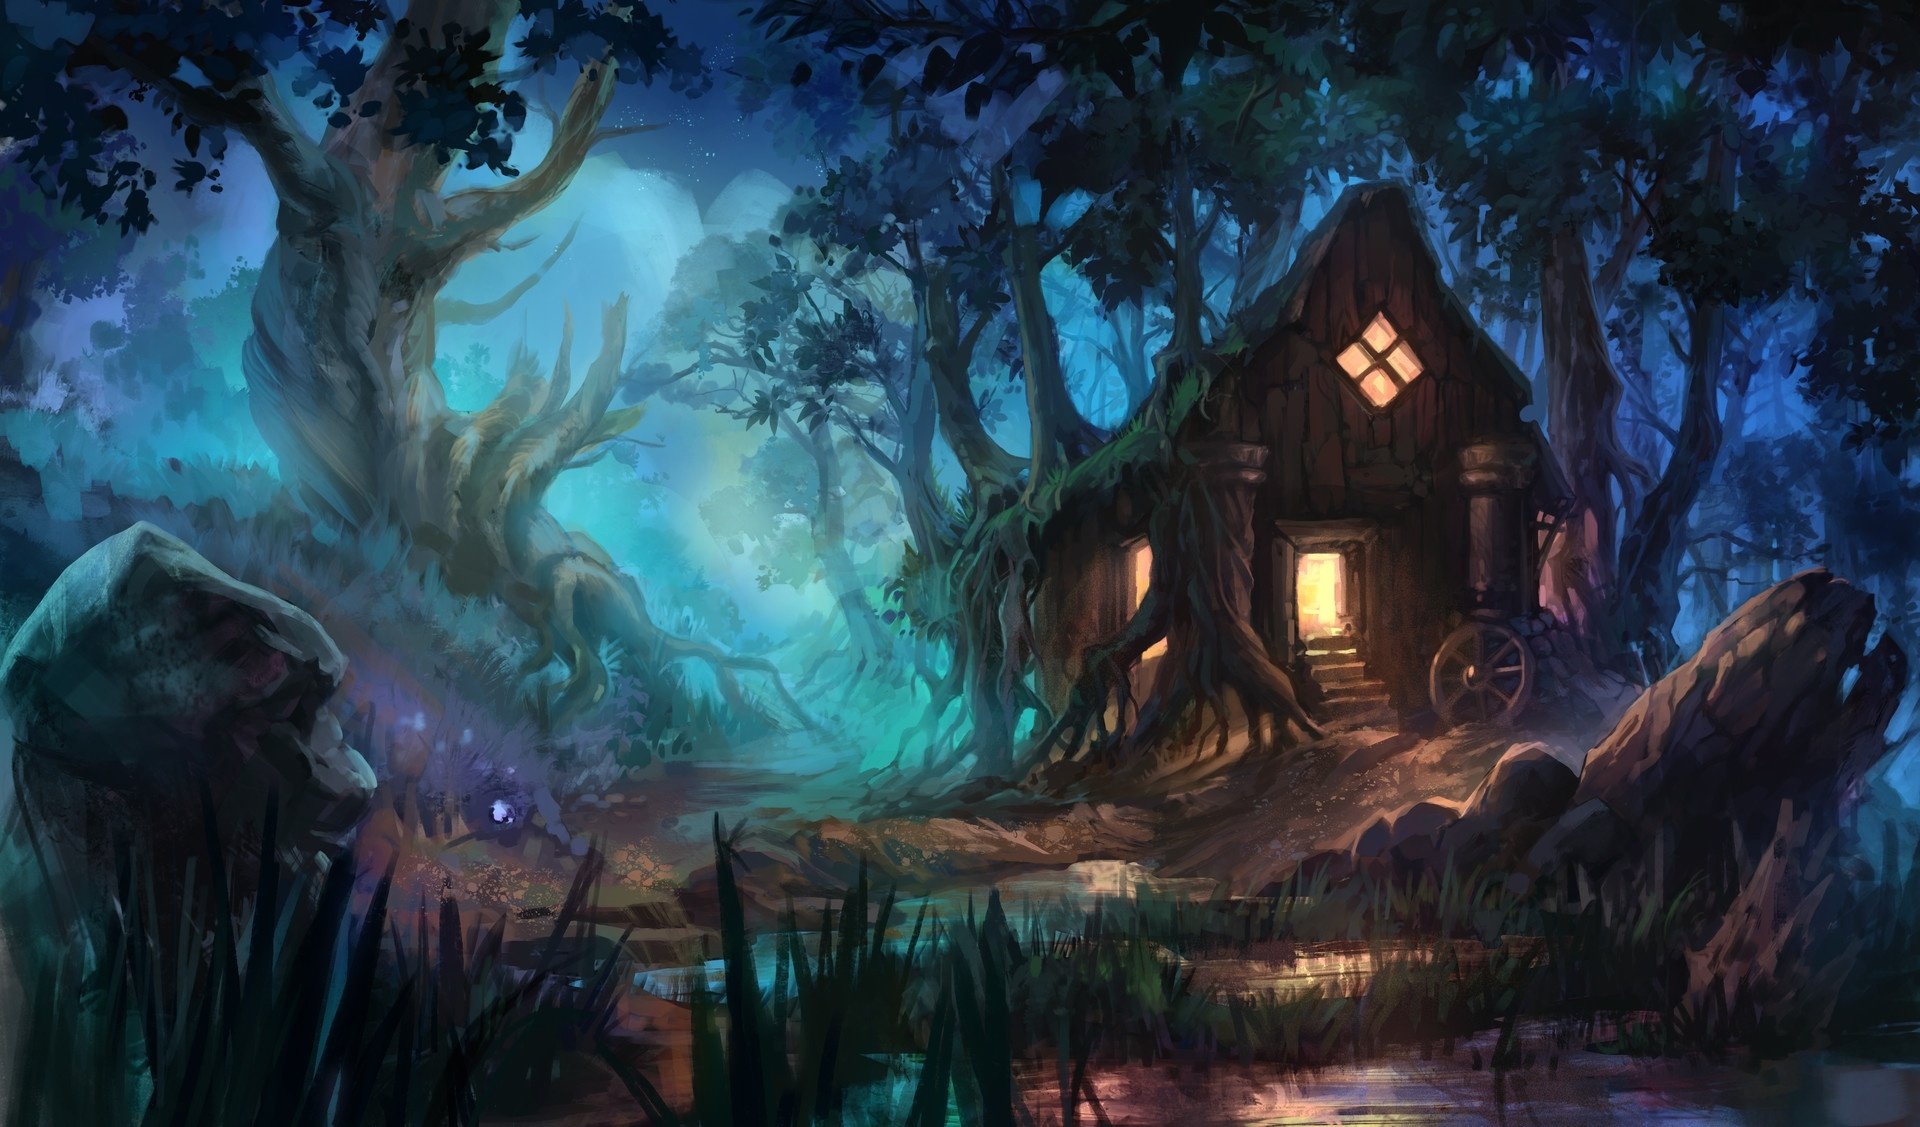 Download Forest Night Fantasy House Hd Wallpaper By Anna Anikeyka